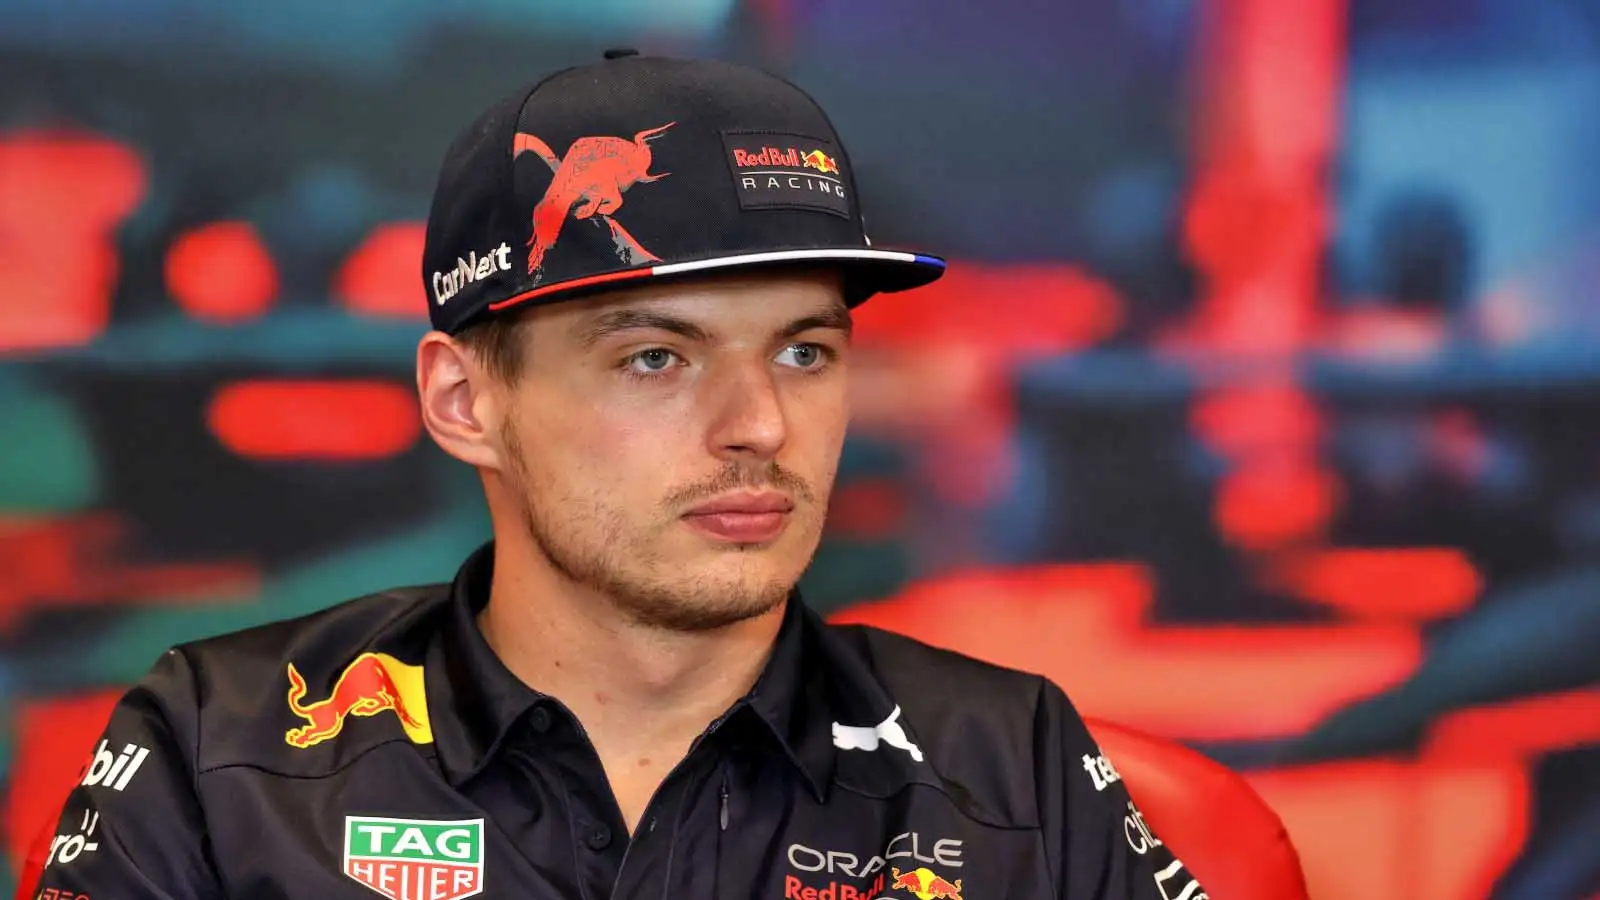 Max Verstappen in the press conference. Monaco May 2022.